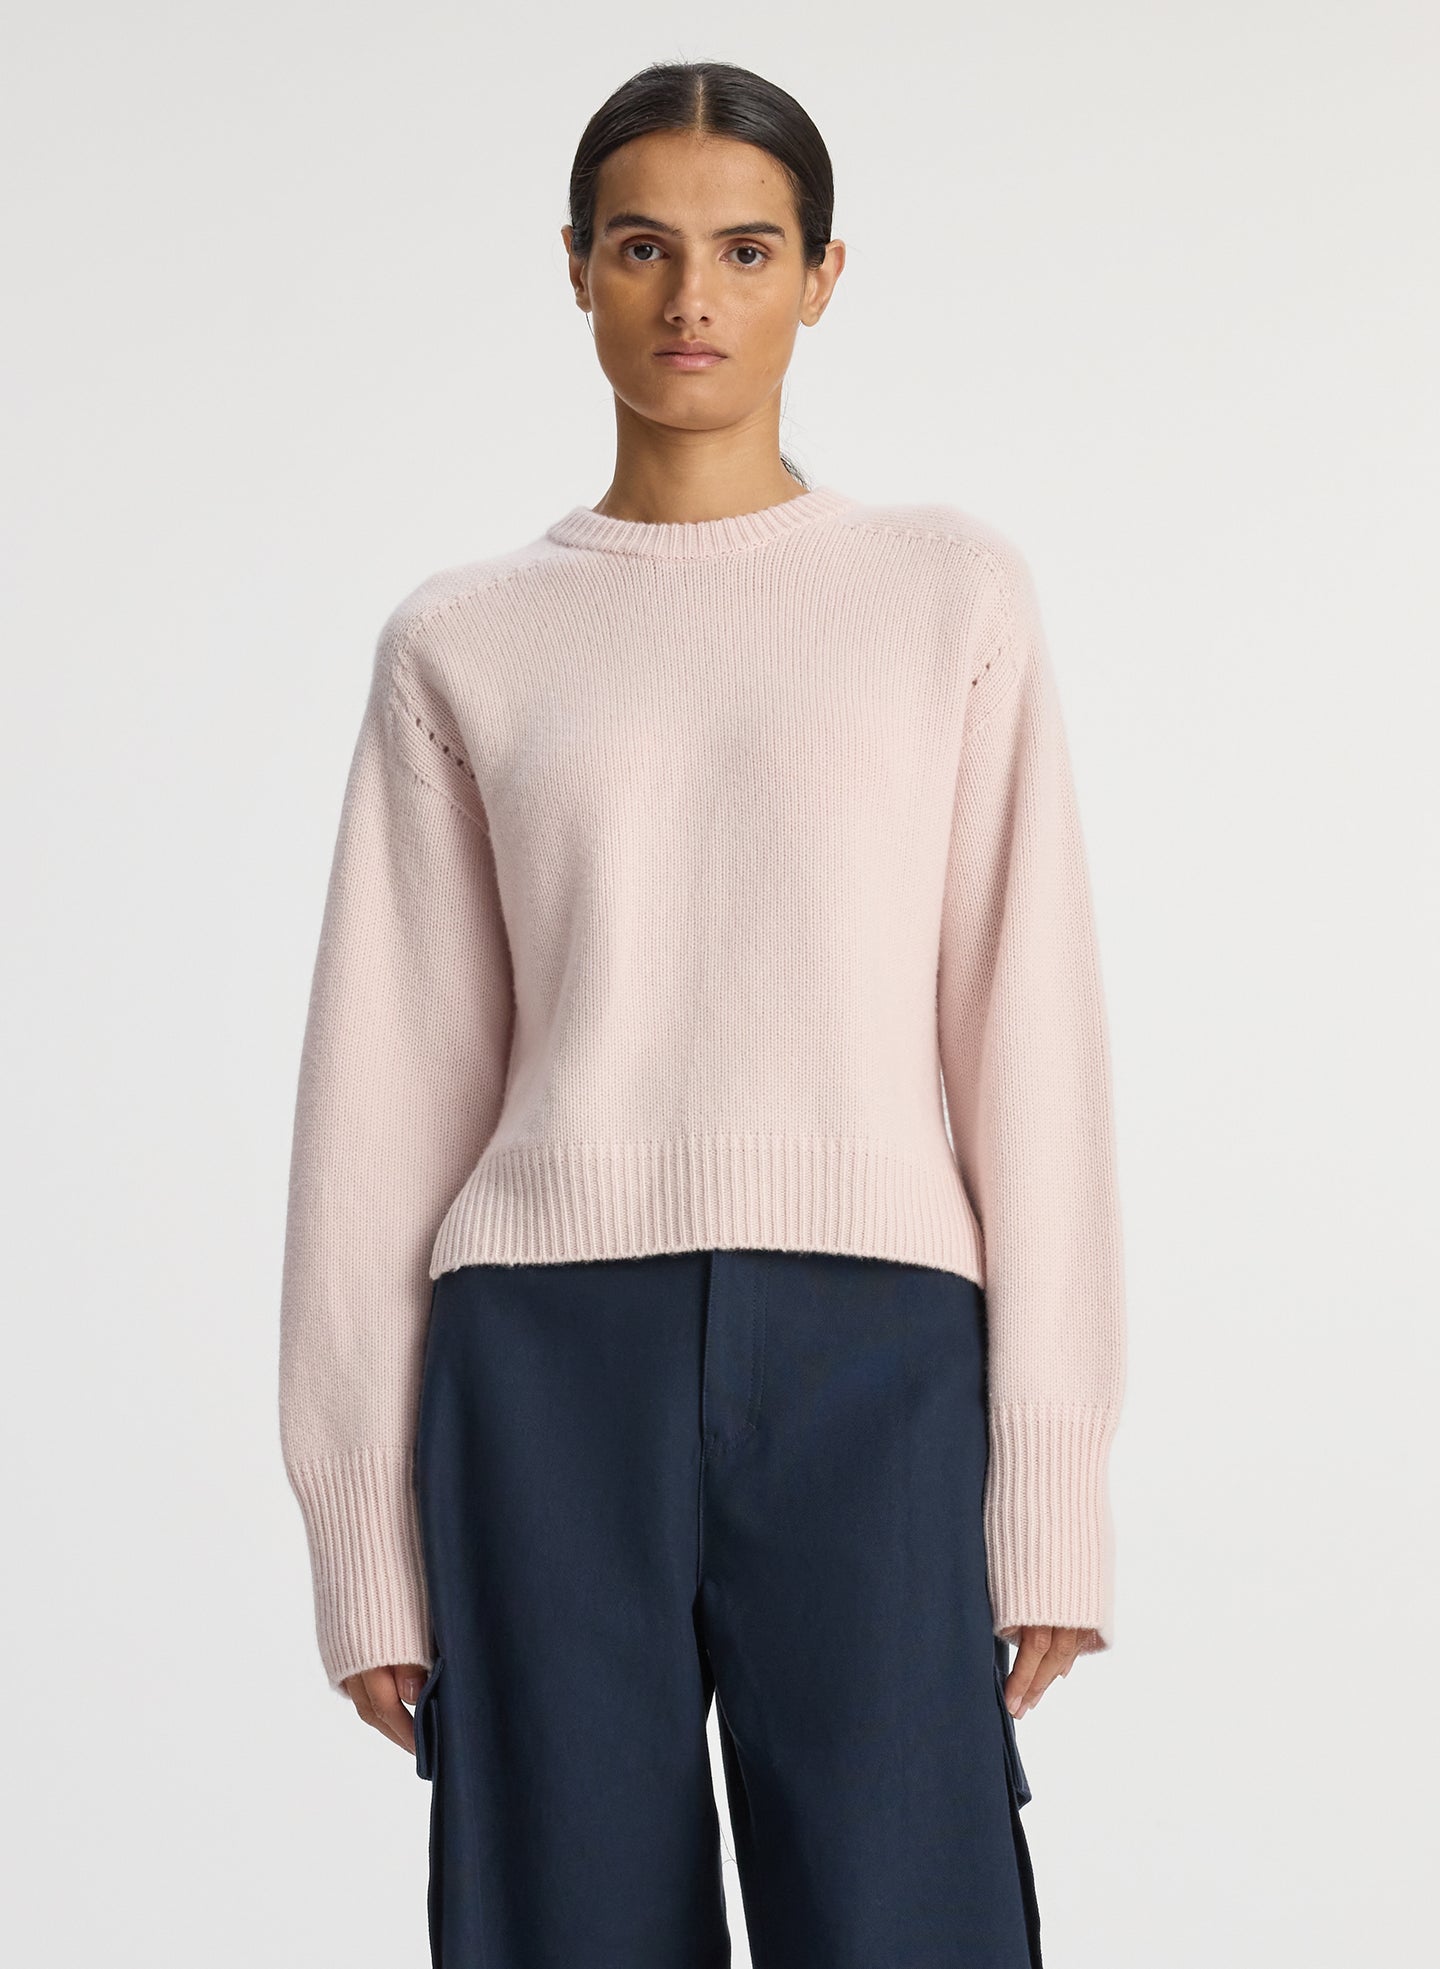 front view of woman wearing pink sweater and navy blue satin cargo pants